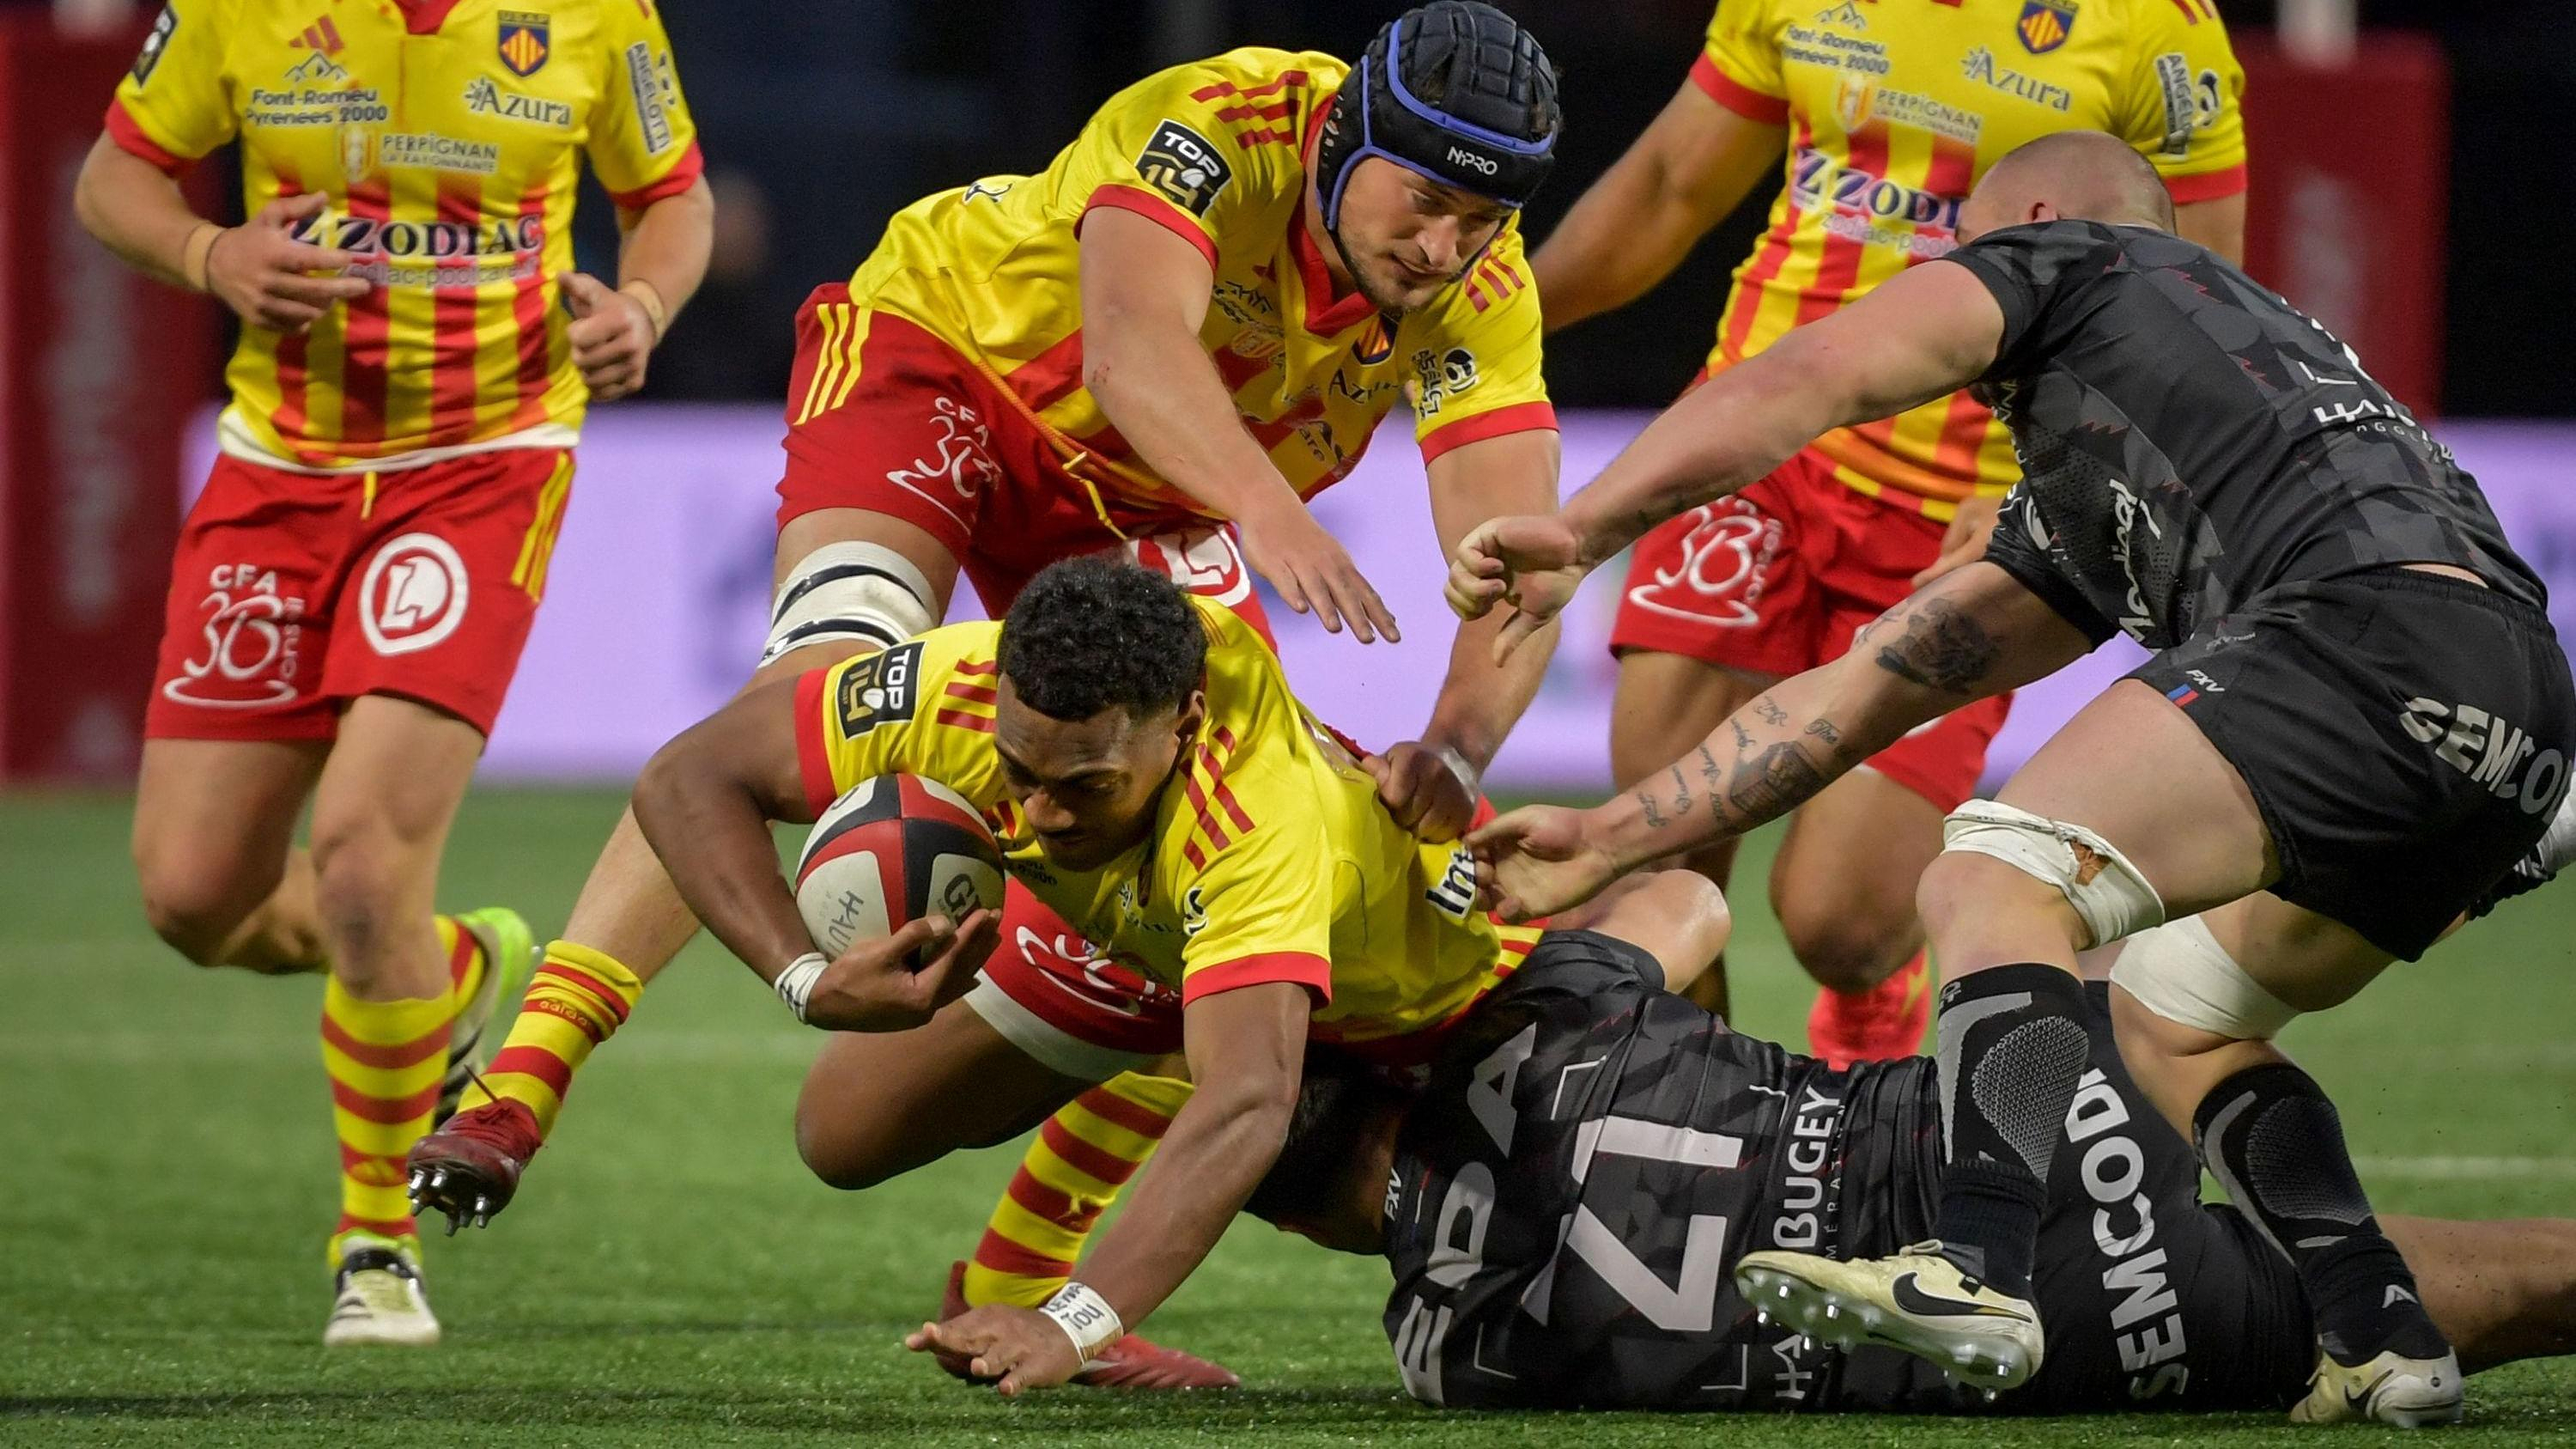 Top 14: in the fight for maintenance, Perpignan has the wind at its back